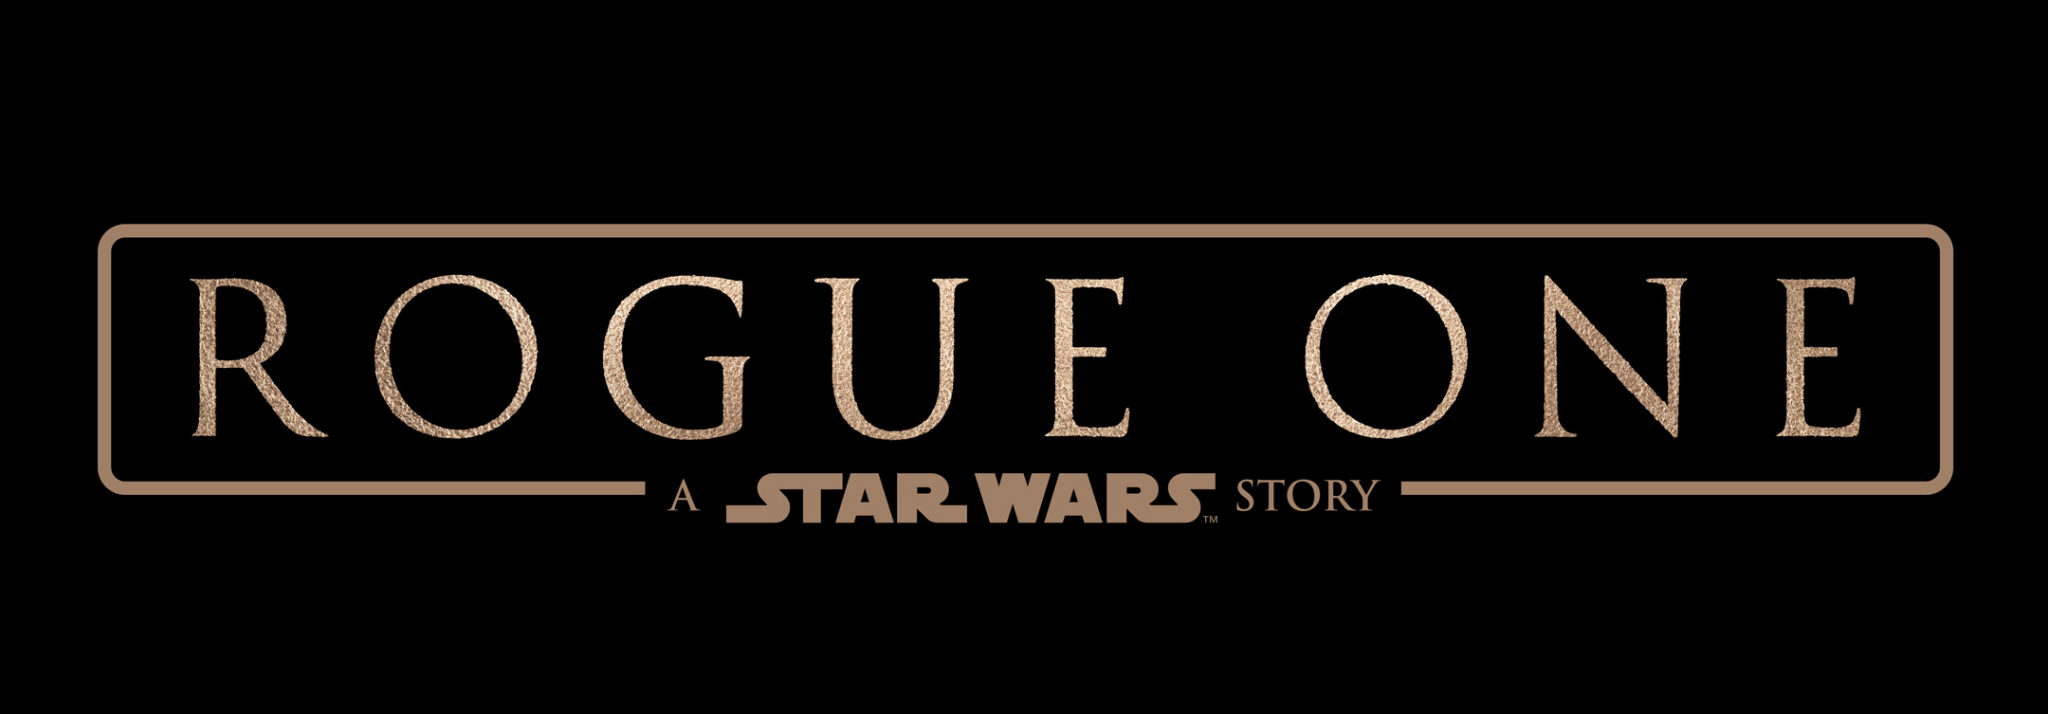 Lucasfilm to Team Up with Five Brands for ‘Rogue One’ Promo Campaign